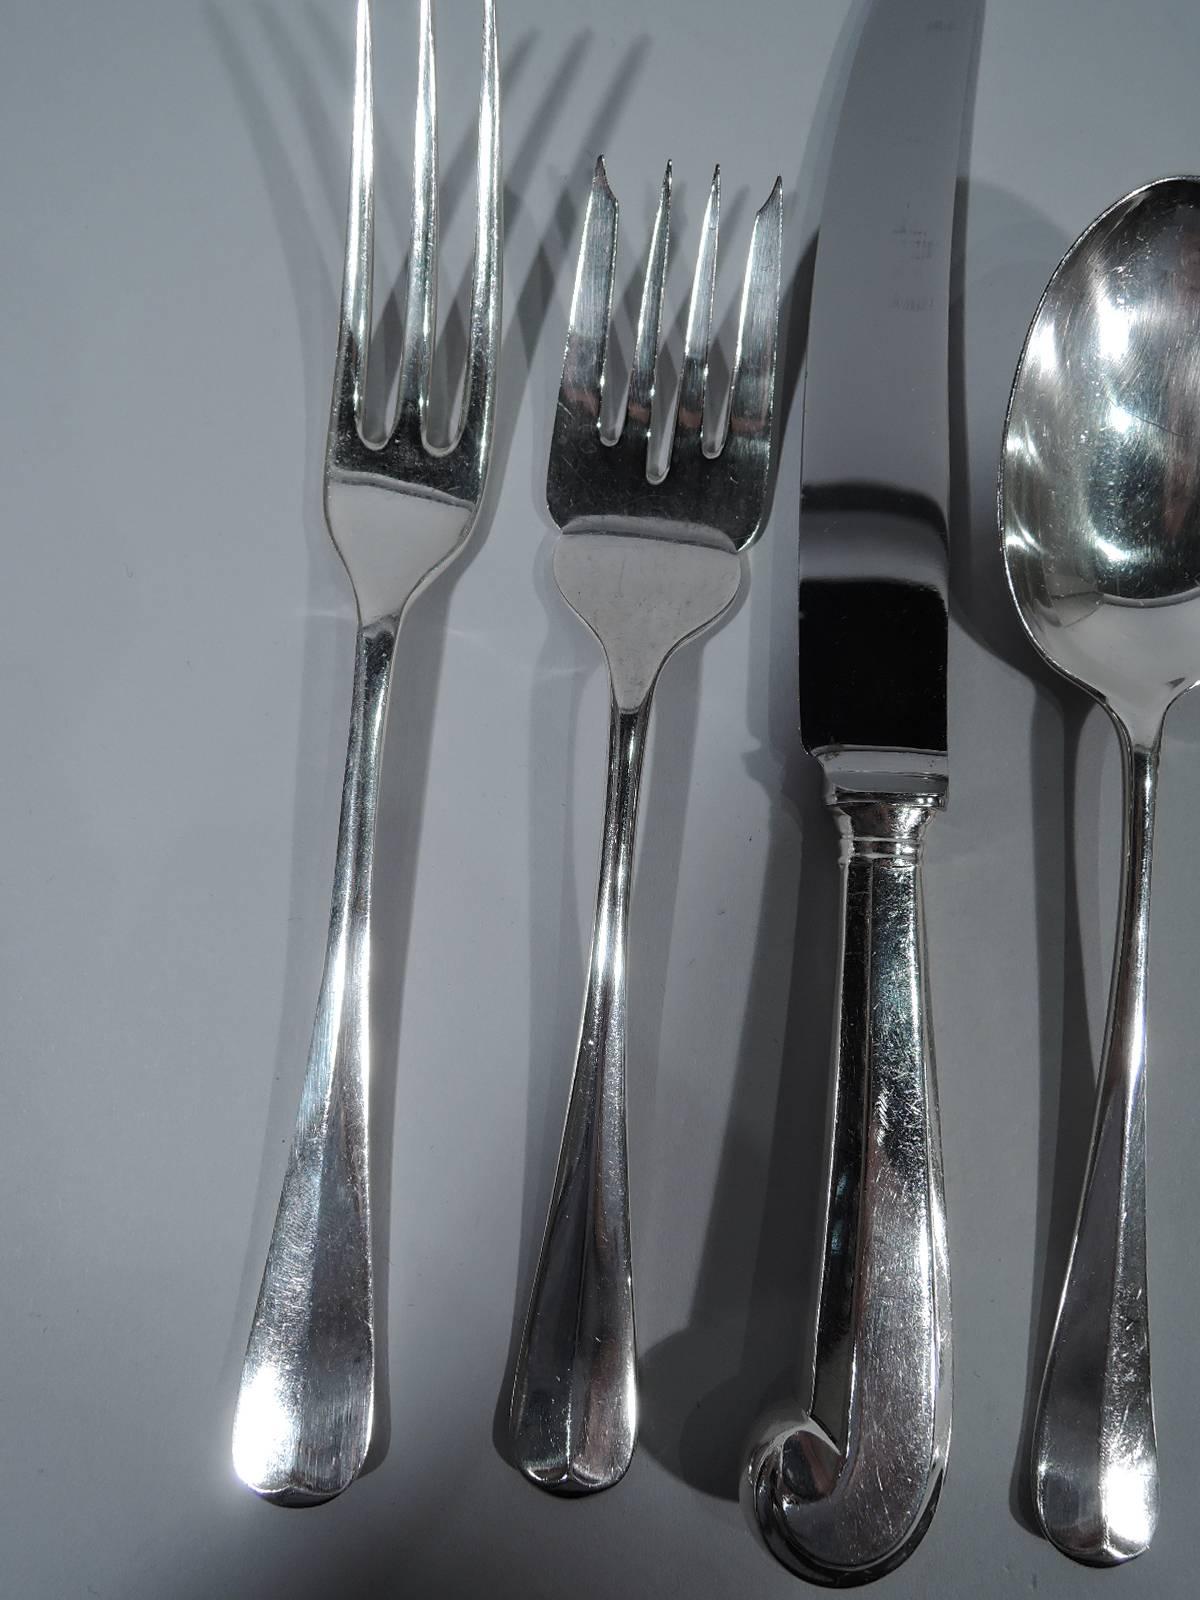 English sterling silver dinner service in Rat Tail pattern. This service comprises 83 pieces (all dimensions in inches): Knives: 12 dinner knives (8 3/8) and 12 butter spreaders (6 1/8); Forks: 12 dinner forks (7 3/8) and 11 salad forks (6 5/8); 12